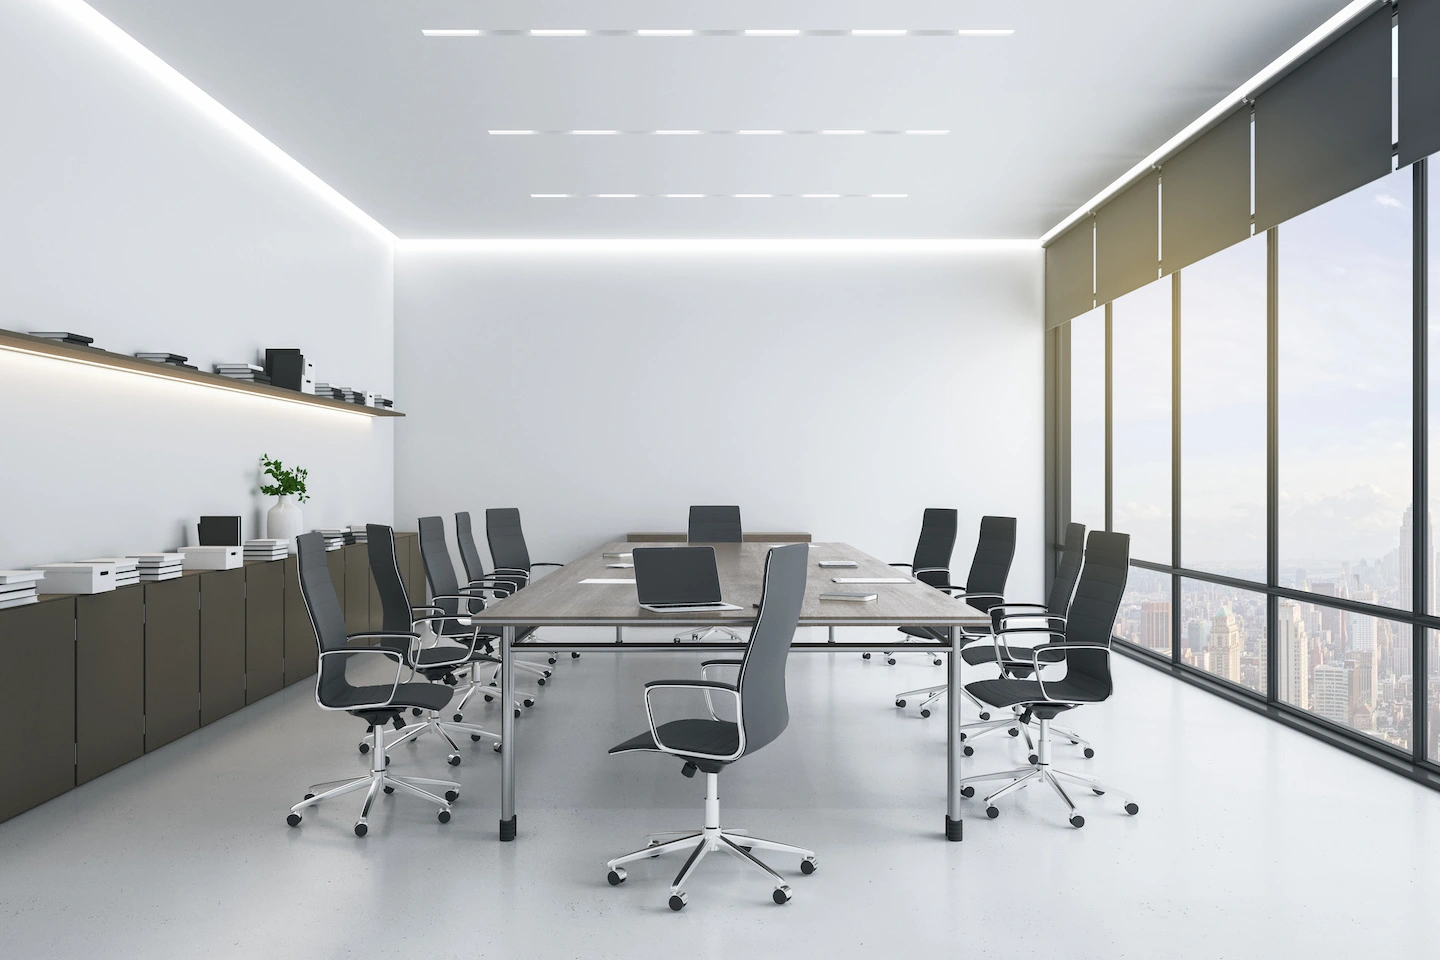 Commercial office meeting room with LED lighting along the corners of the walls.